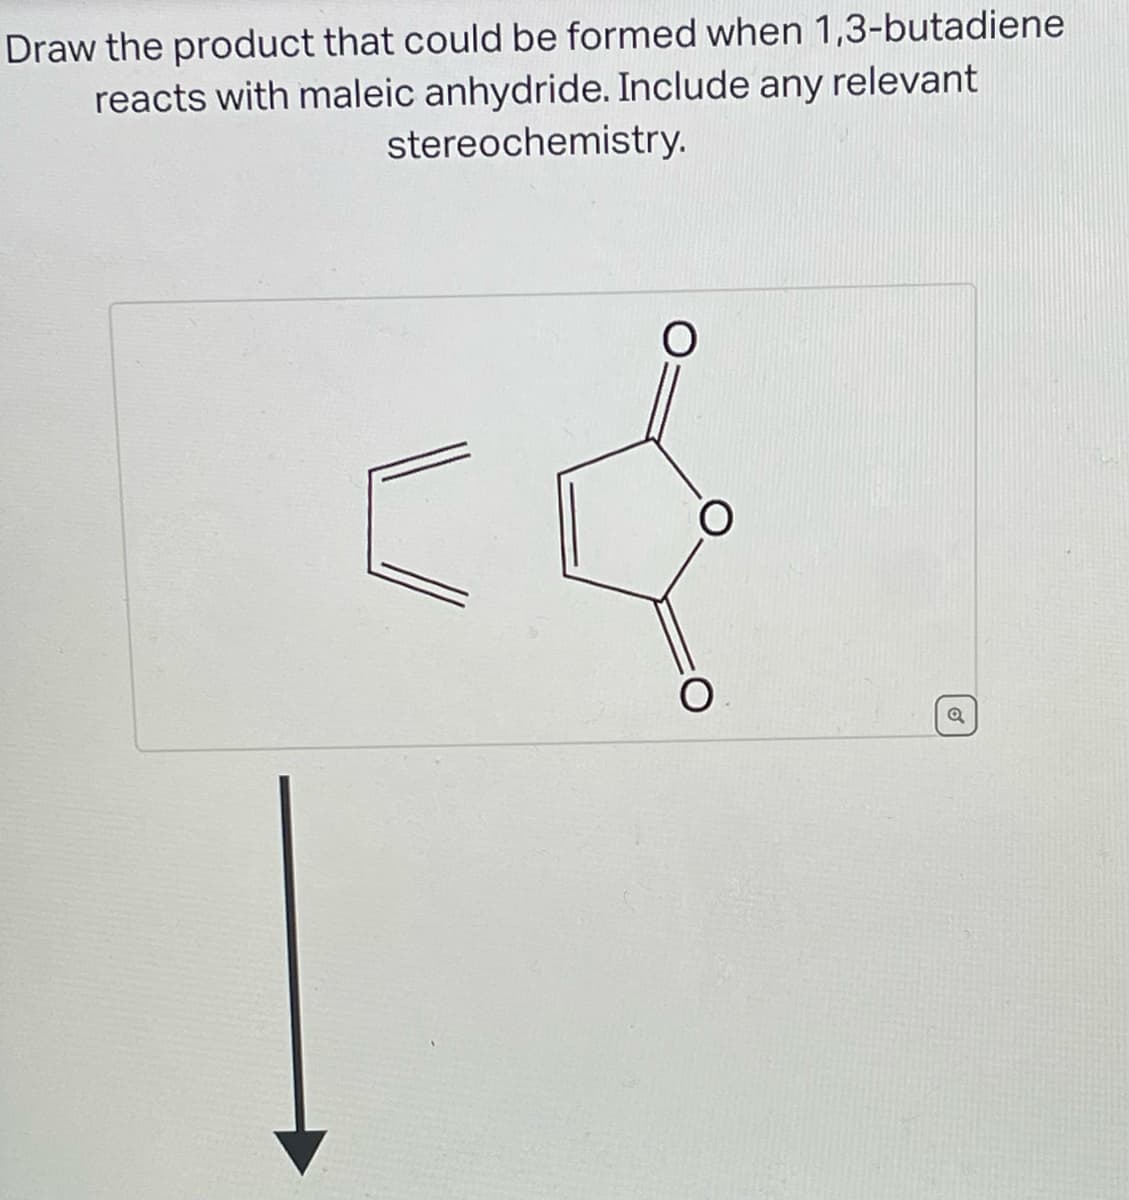 Draw the product that could be formed when 1,3-butadiene
reacts with maleic anhydride. Include any relevant
stereochemistry.
O
O
O
Q